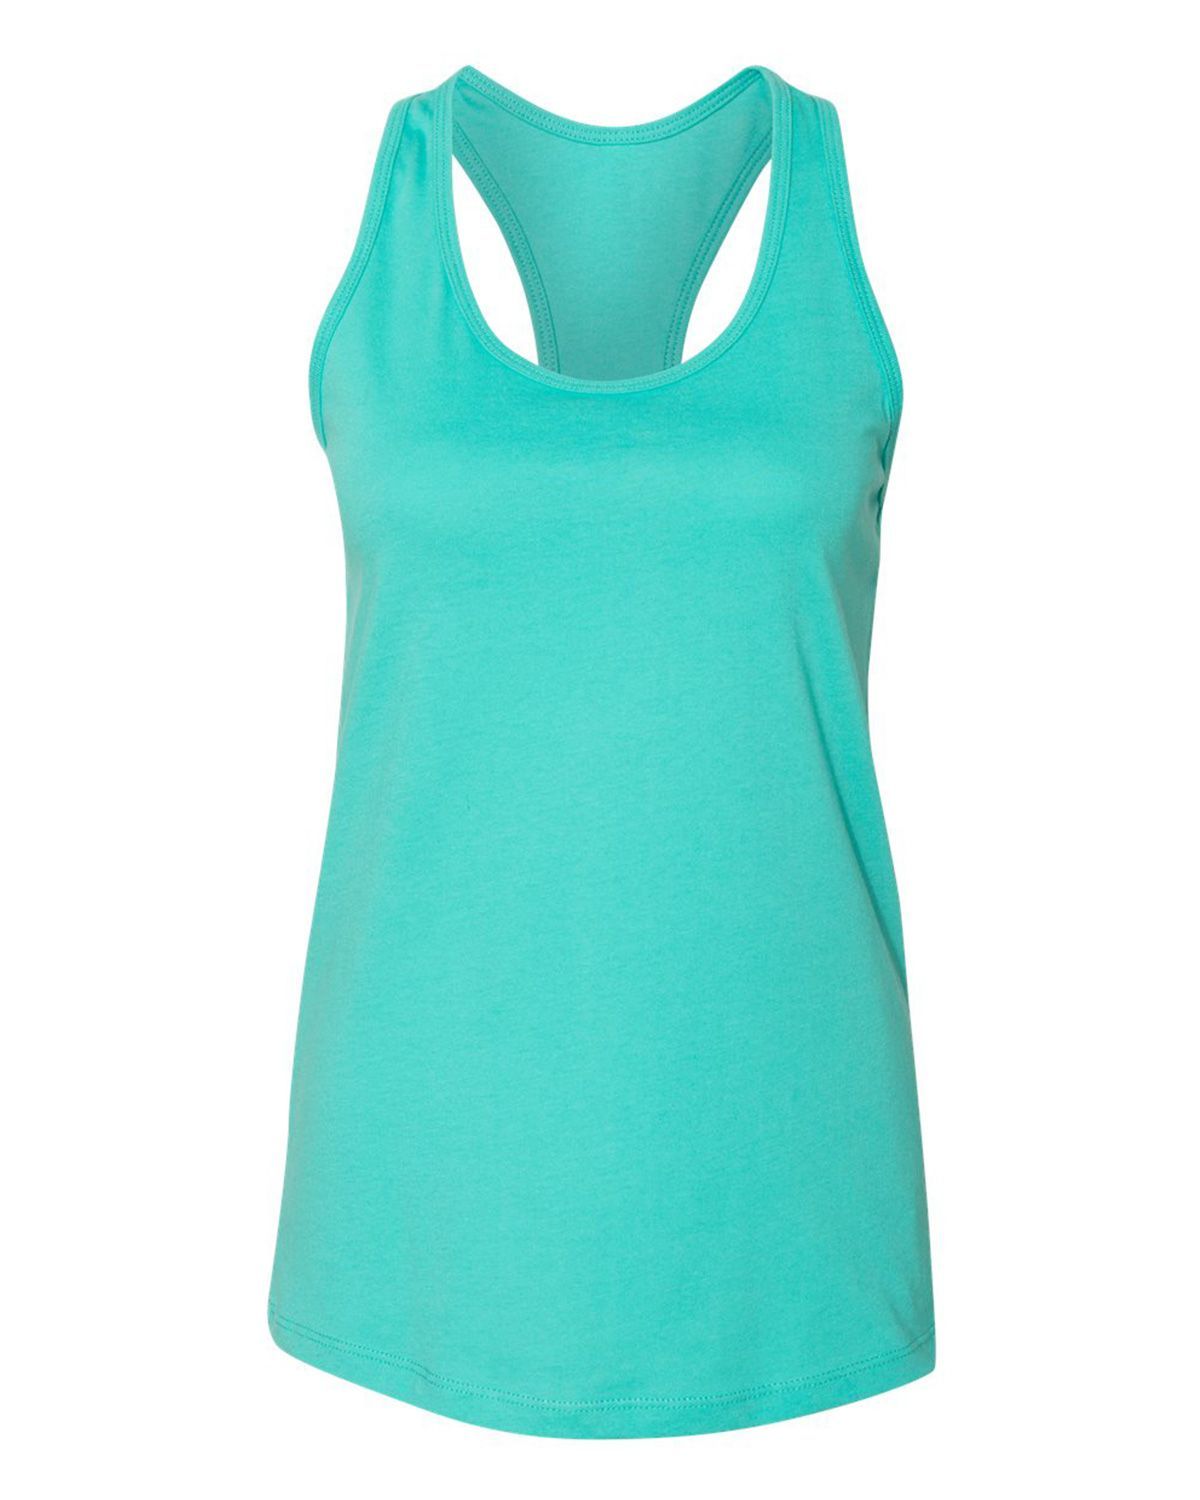 Bella + Canvas 6008 Womens Jersey Racerback Tank - Free Shipping Available